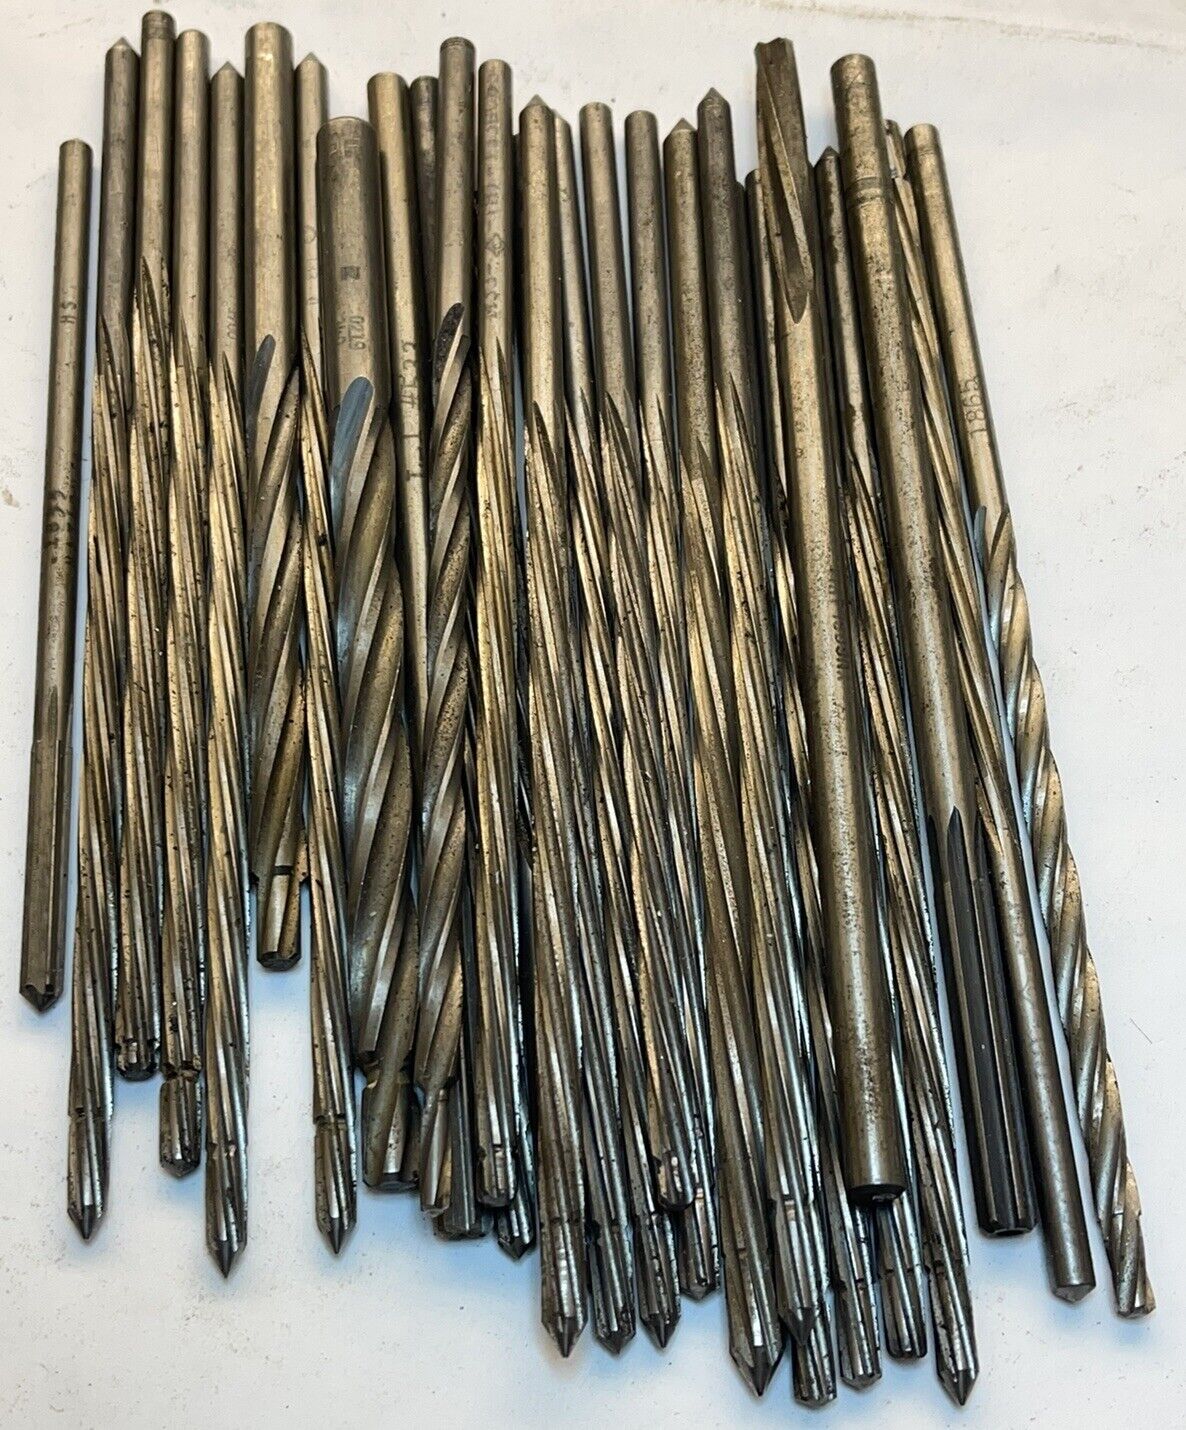 1 Lbs.Assorted Aircraft Chucking Reamers Aircraft Tool range 1/8 To 5/16(23N145)